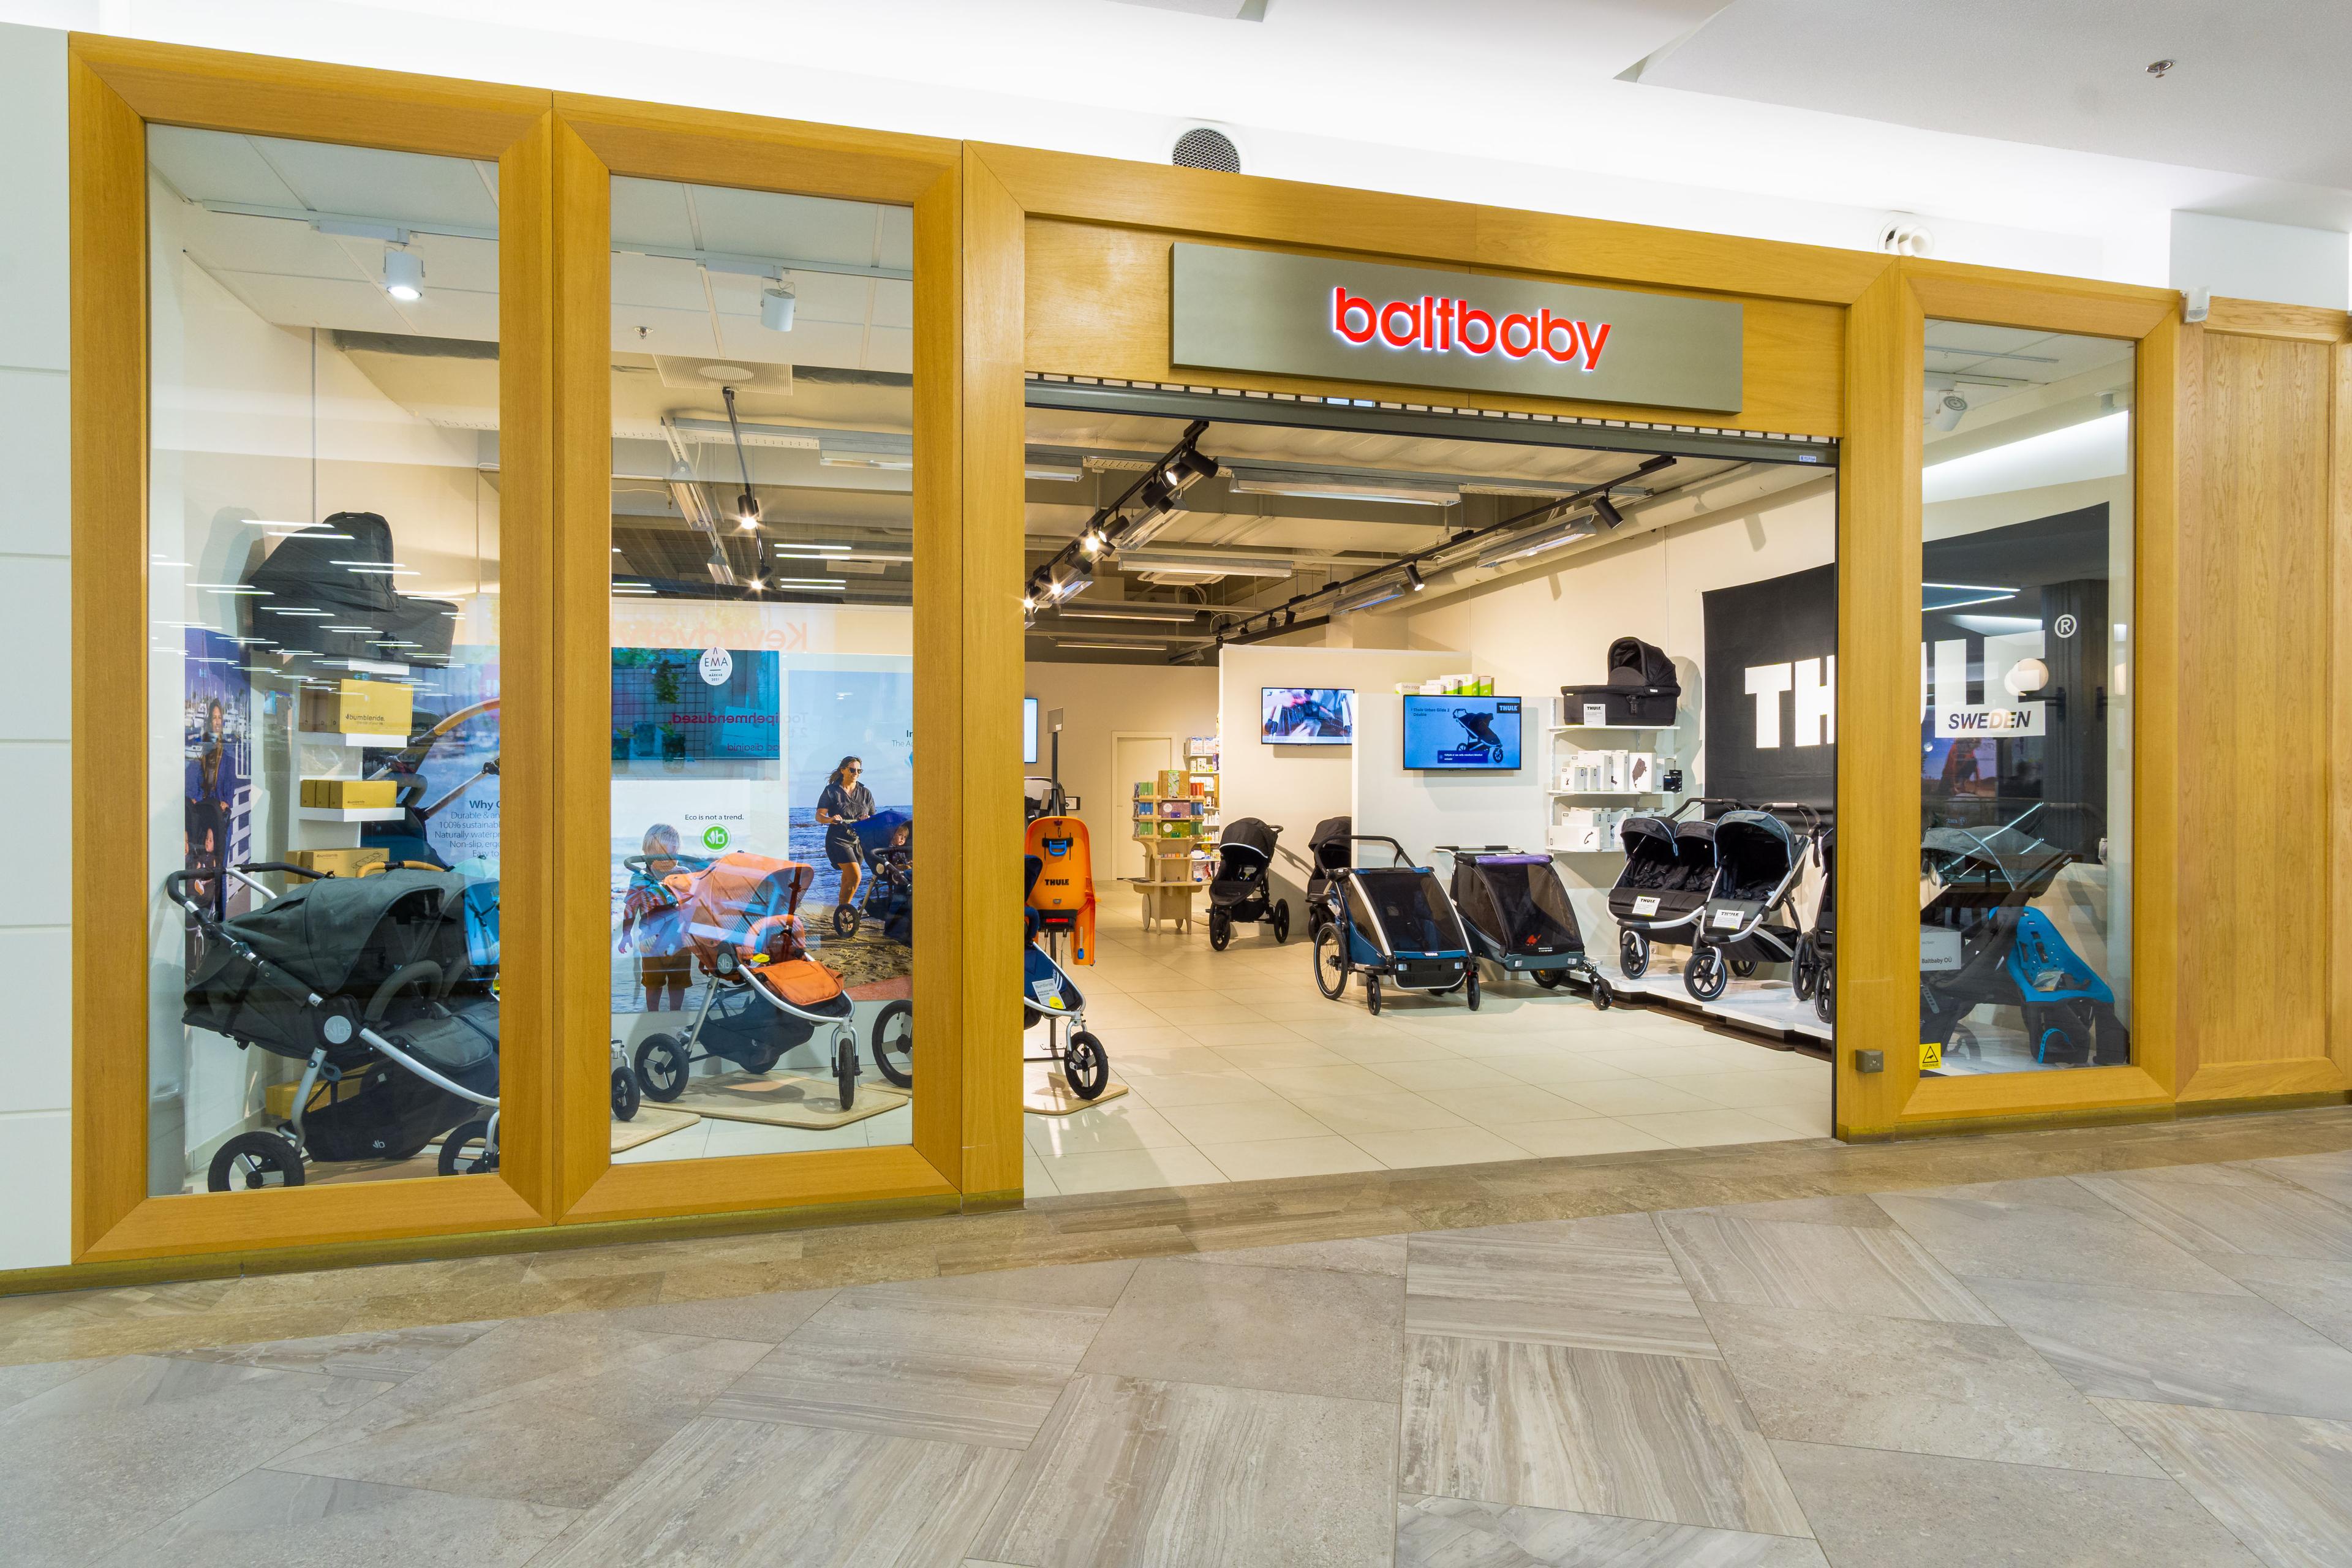 View of Baltbaby store in Kvartal shopping centre.